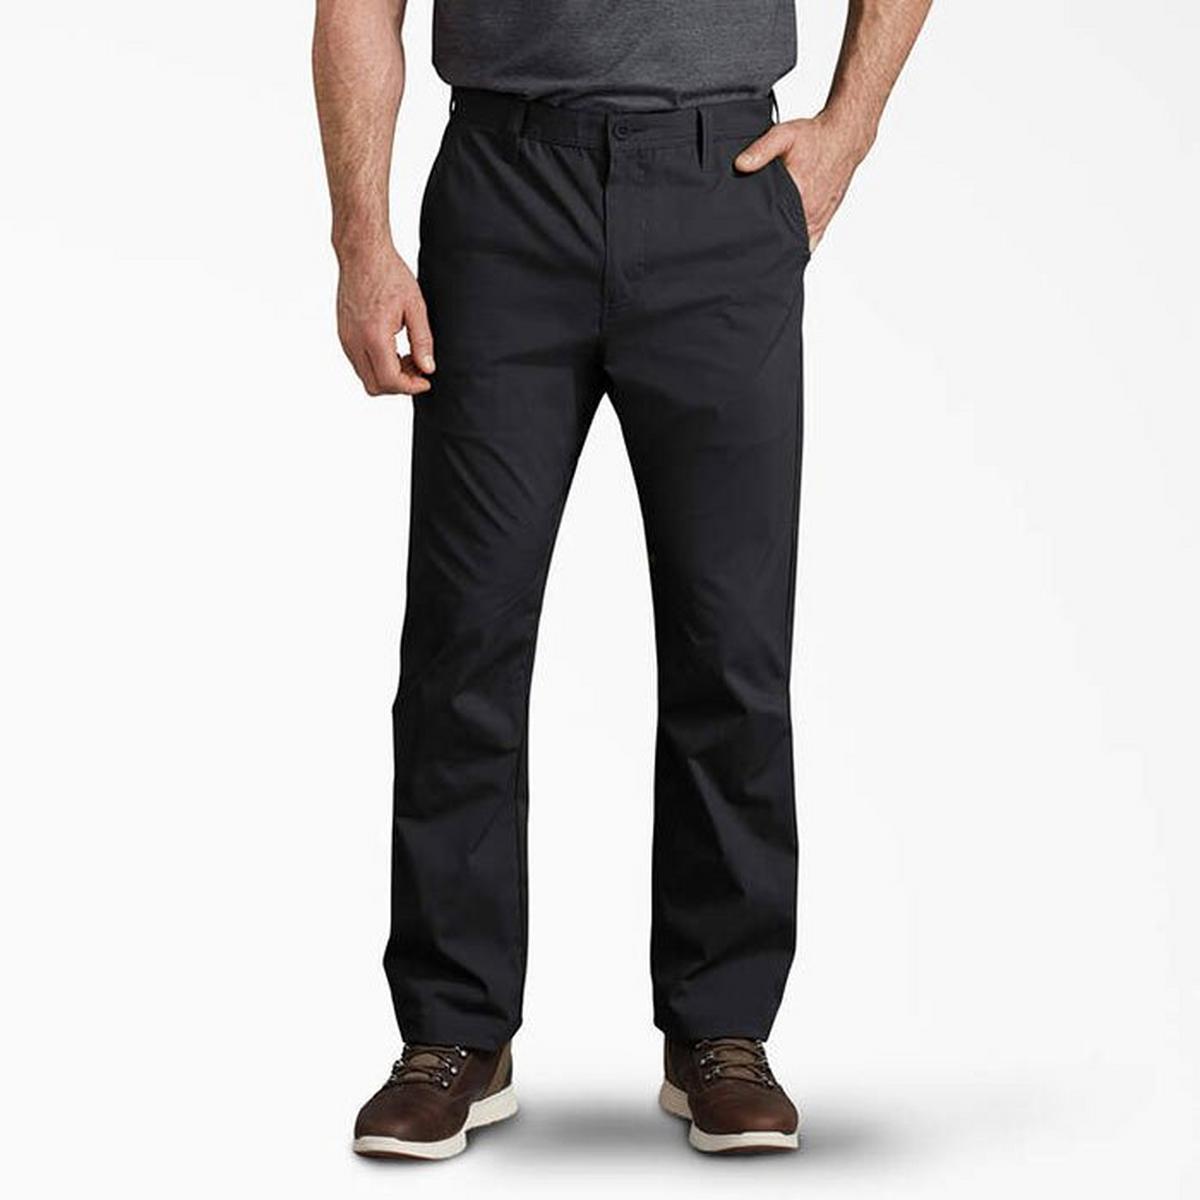 Men's FLEX Cooling Relaxed Fit Pant